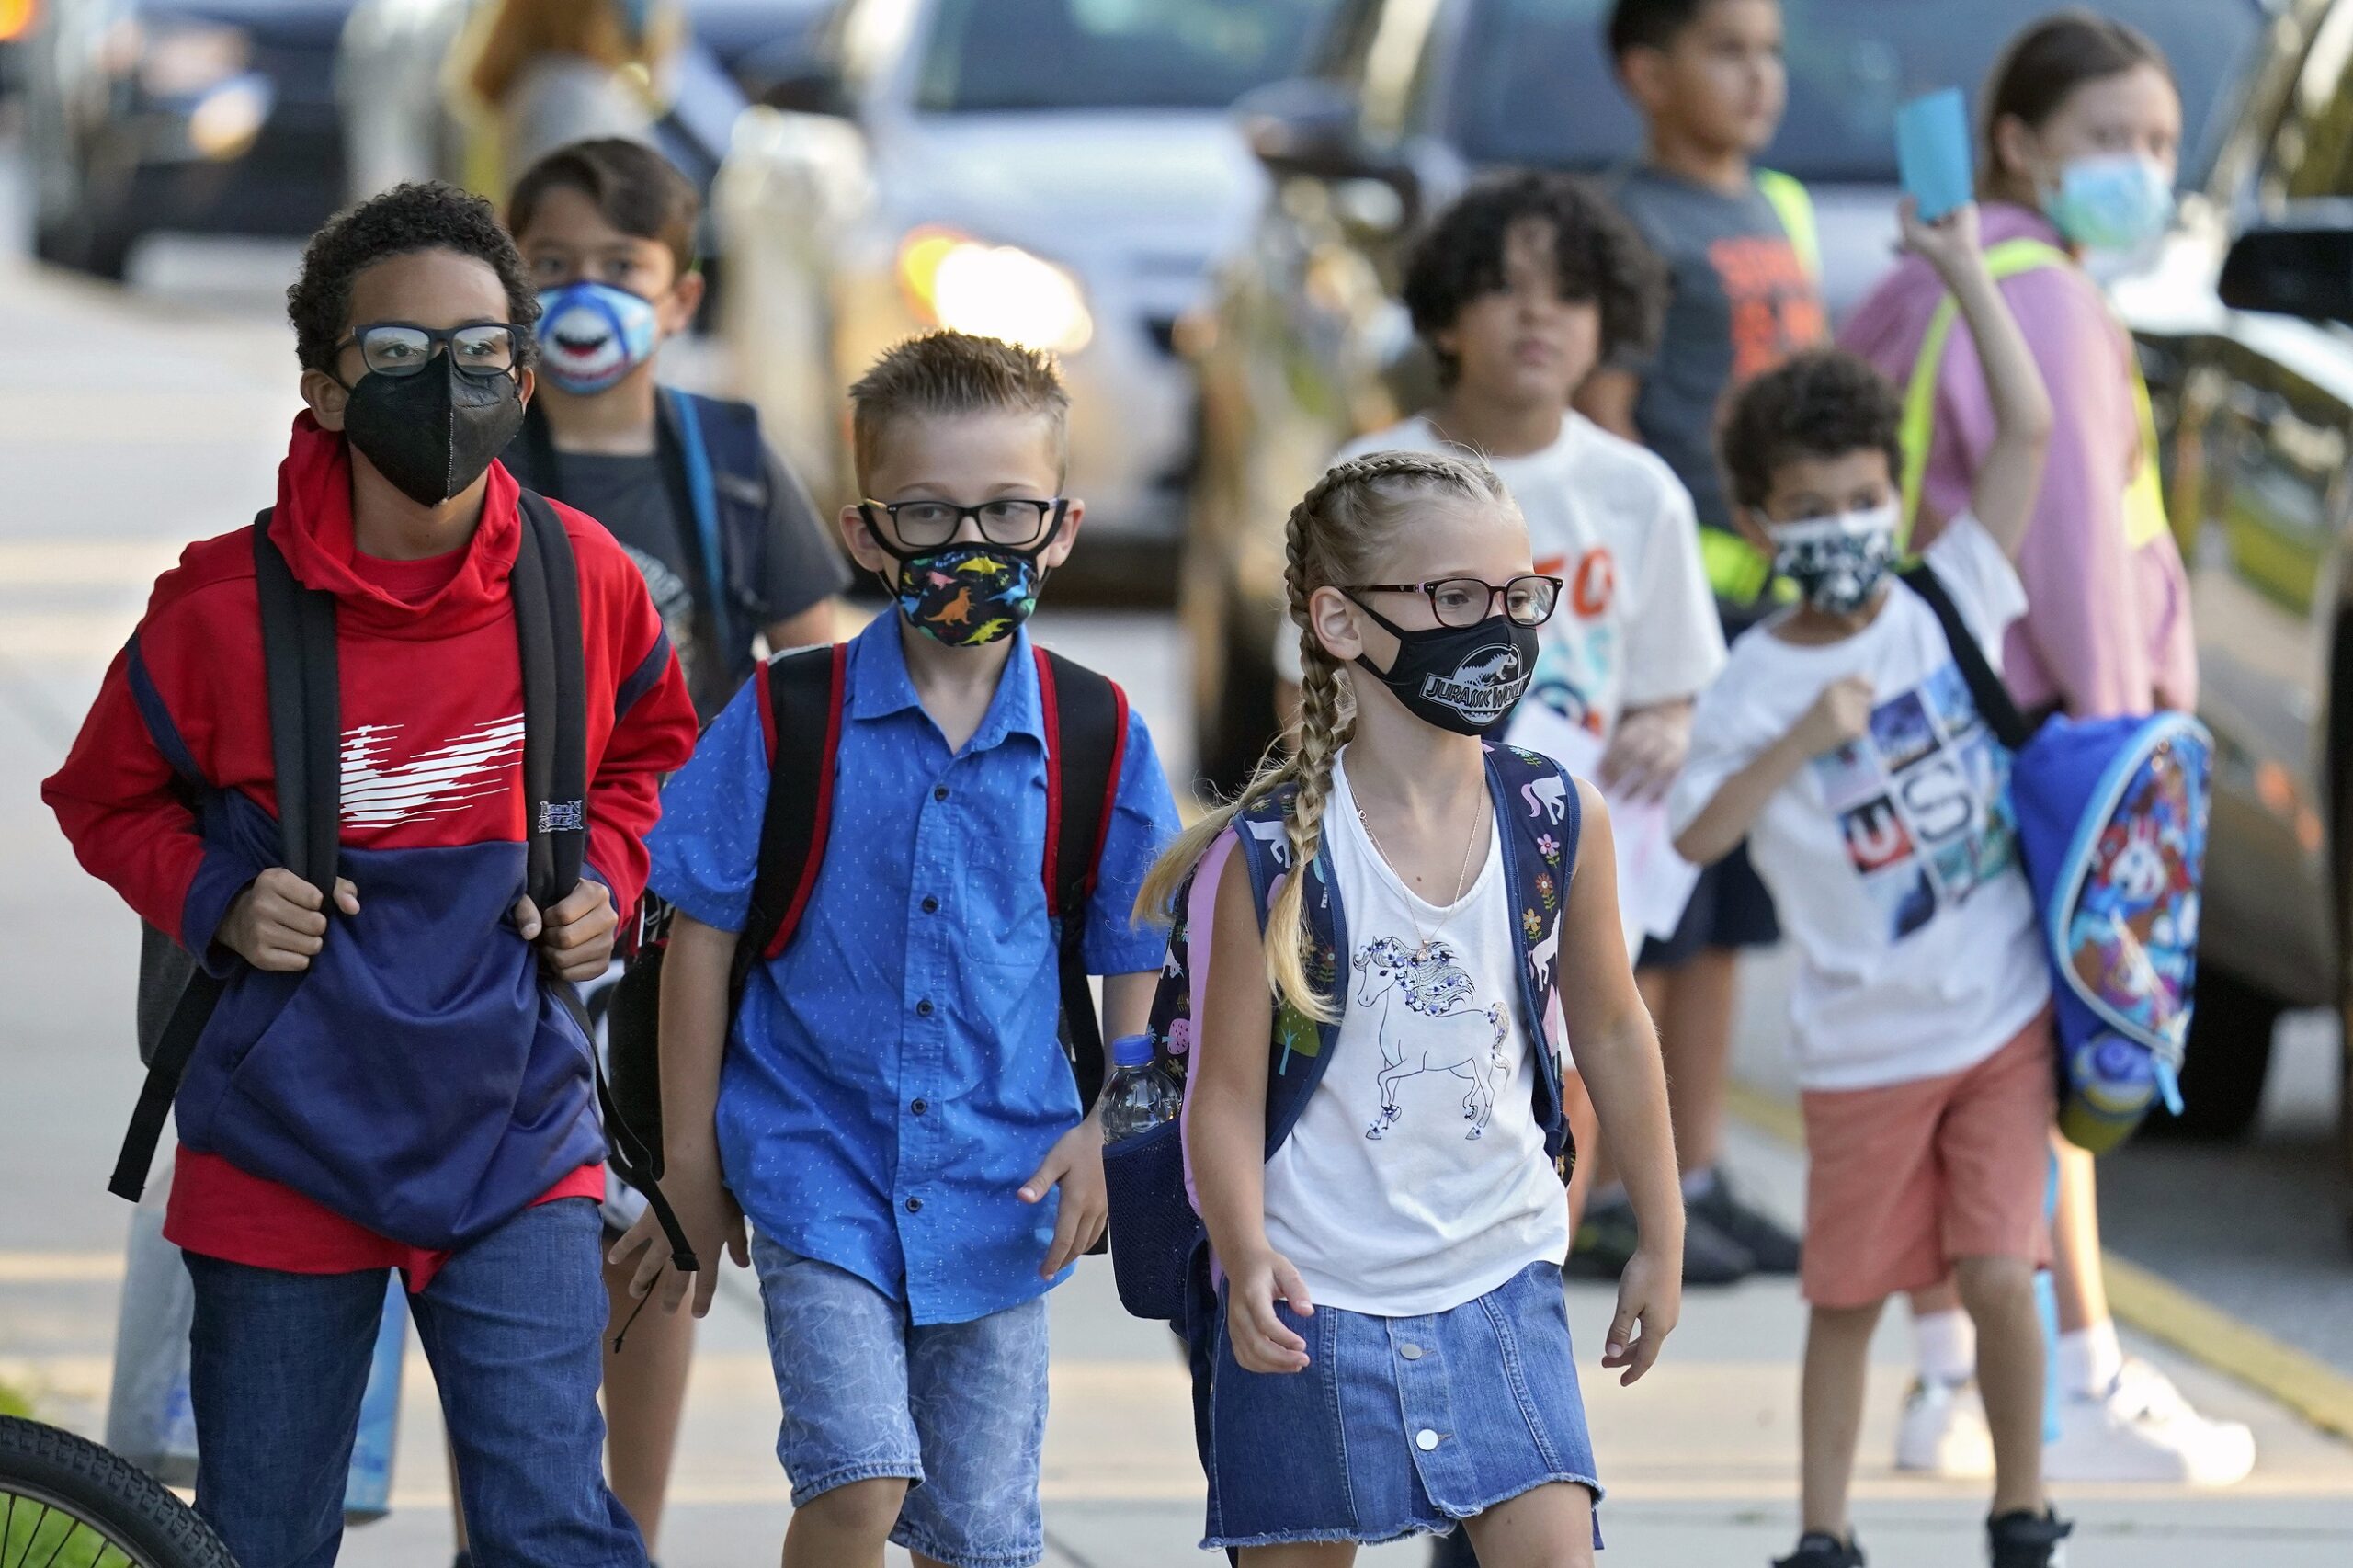 Florida lawsuit over school mask mandate ban enters second day